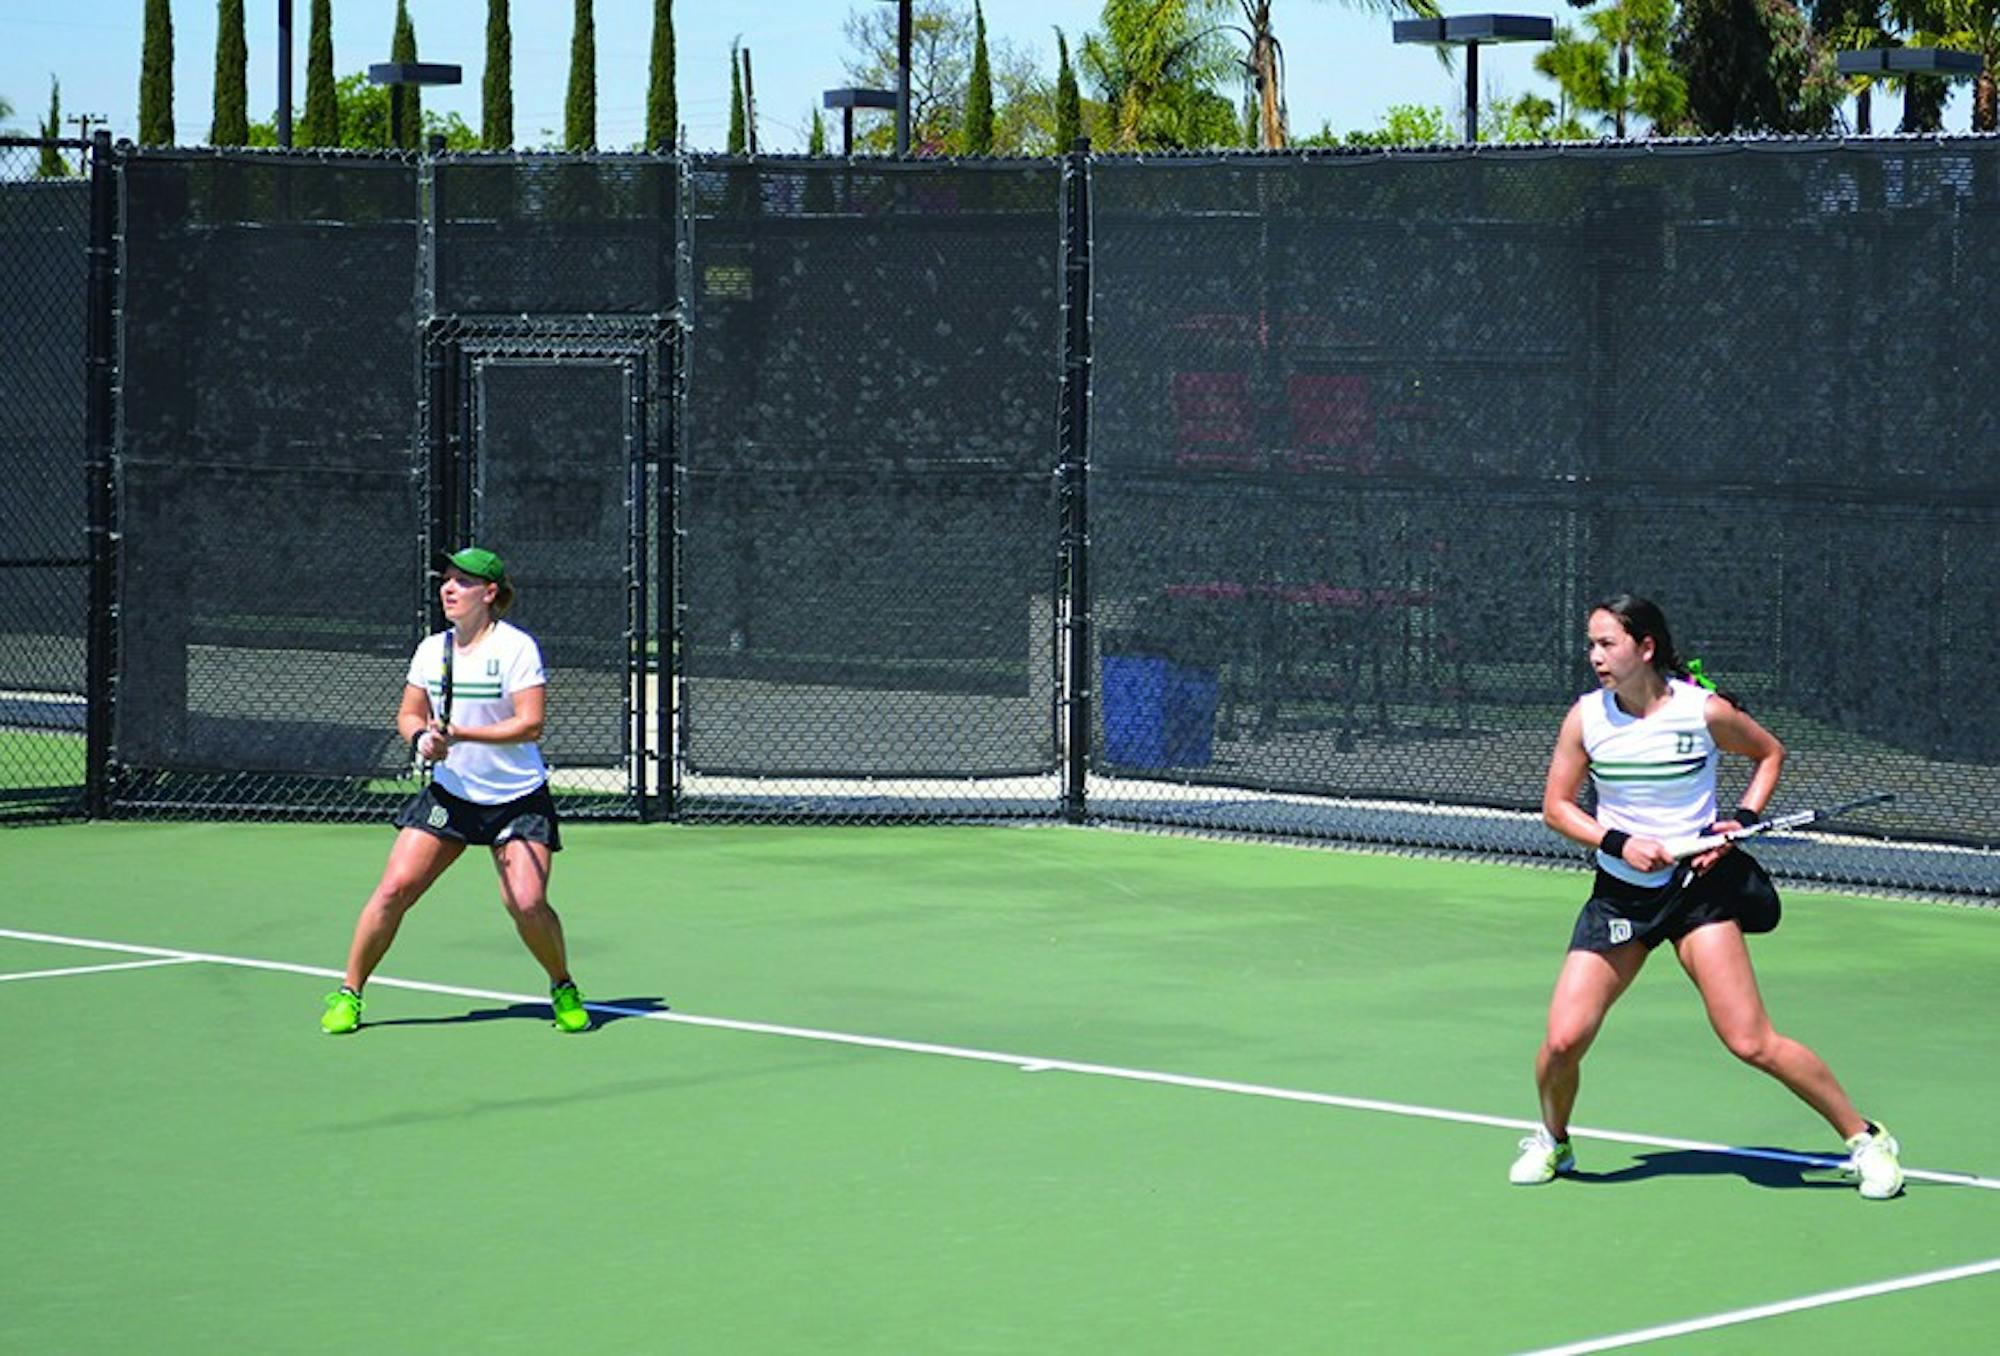 Doubles partners Kristina Mathis ’18 and Taylor Ng ’17 are ranked 10th in the ITA Preseason following last season’s successful run.